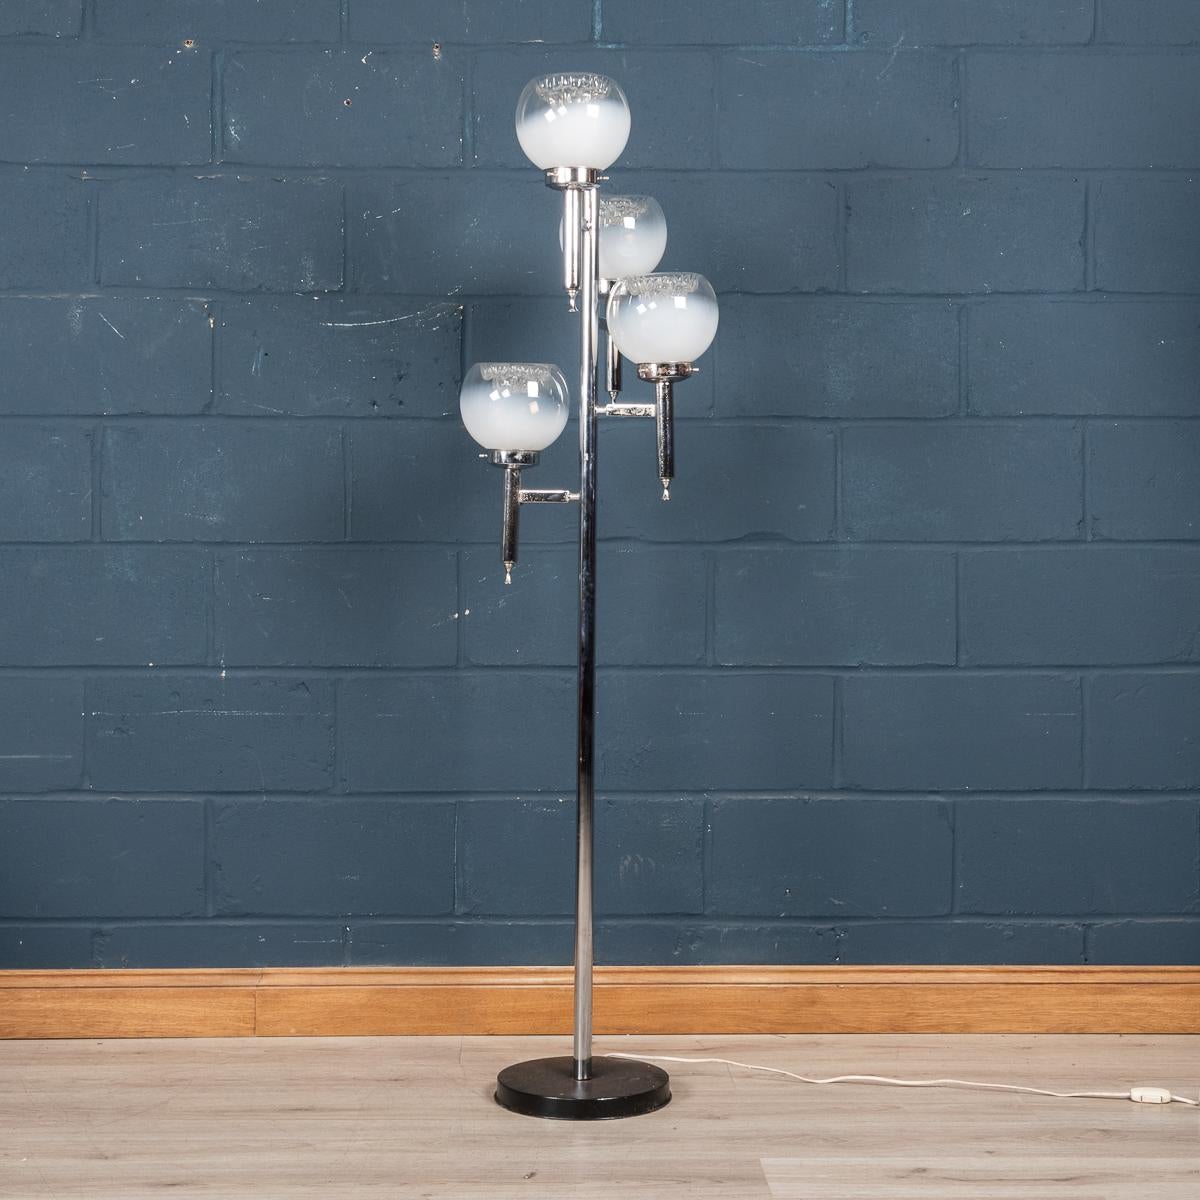 A delightful floor lamp manufactured in the manner of Gaetano Sciolari by Mazzega, made in the famous island of Murano, Venice, in Italy around the 1970's. A circular base with a pedal switch supports a chrome metal frame with four beautiful